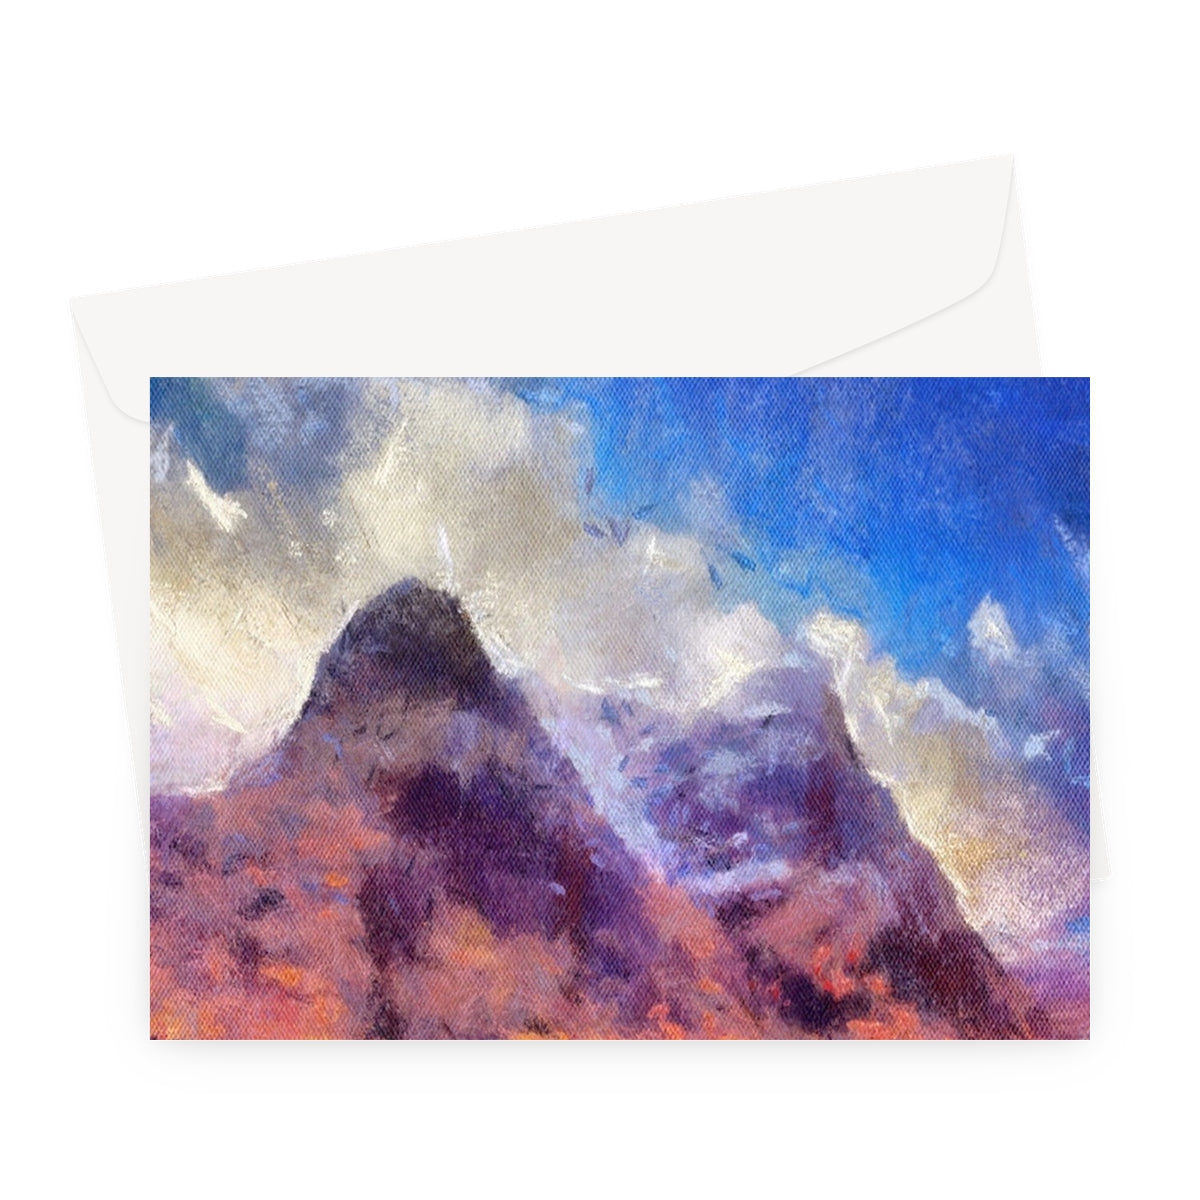 Glencoe Art Gifts Greeting Card-Greetings Cards-Glencoe Art Gallery-A5 Landscape-1 Card-Paintings, Prints, Homeware, Art Gifts From Scotland By Scottish Artist Kevin Hunter